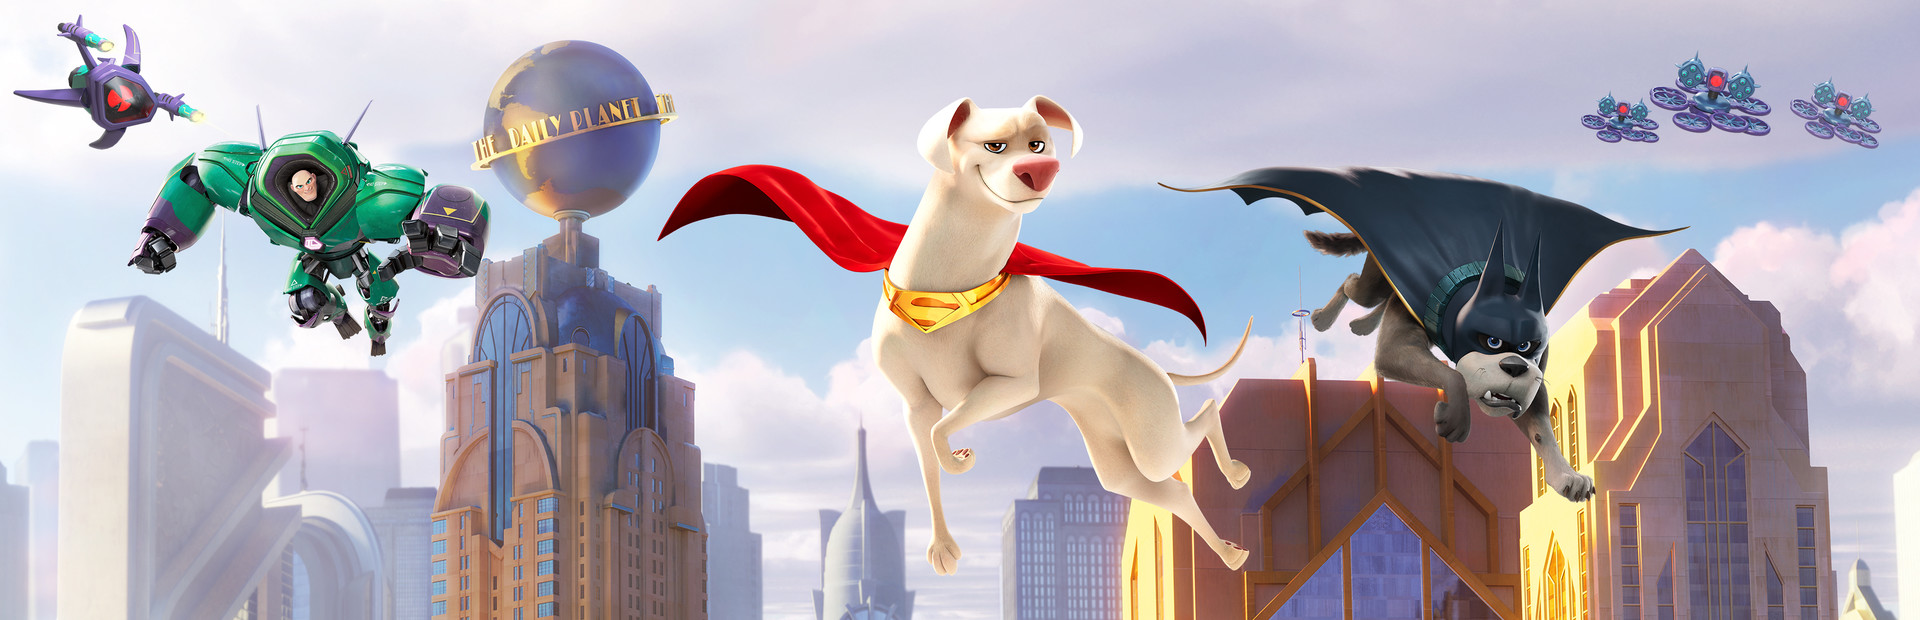 DC League of Super-Pets: The Adventures of Krypto and Ace cover image